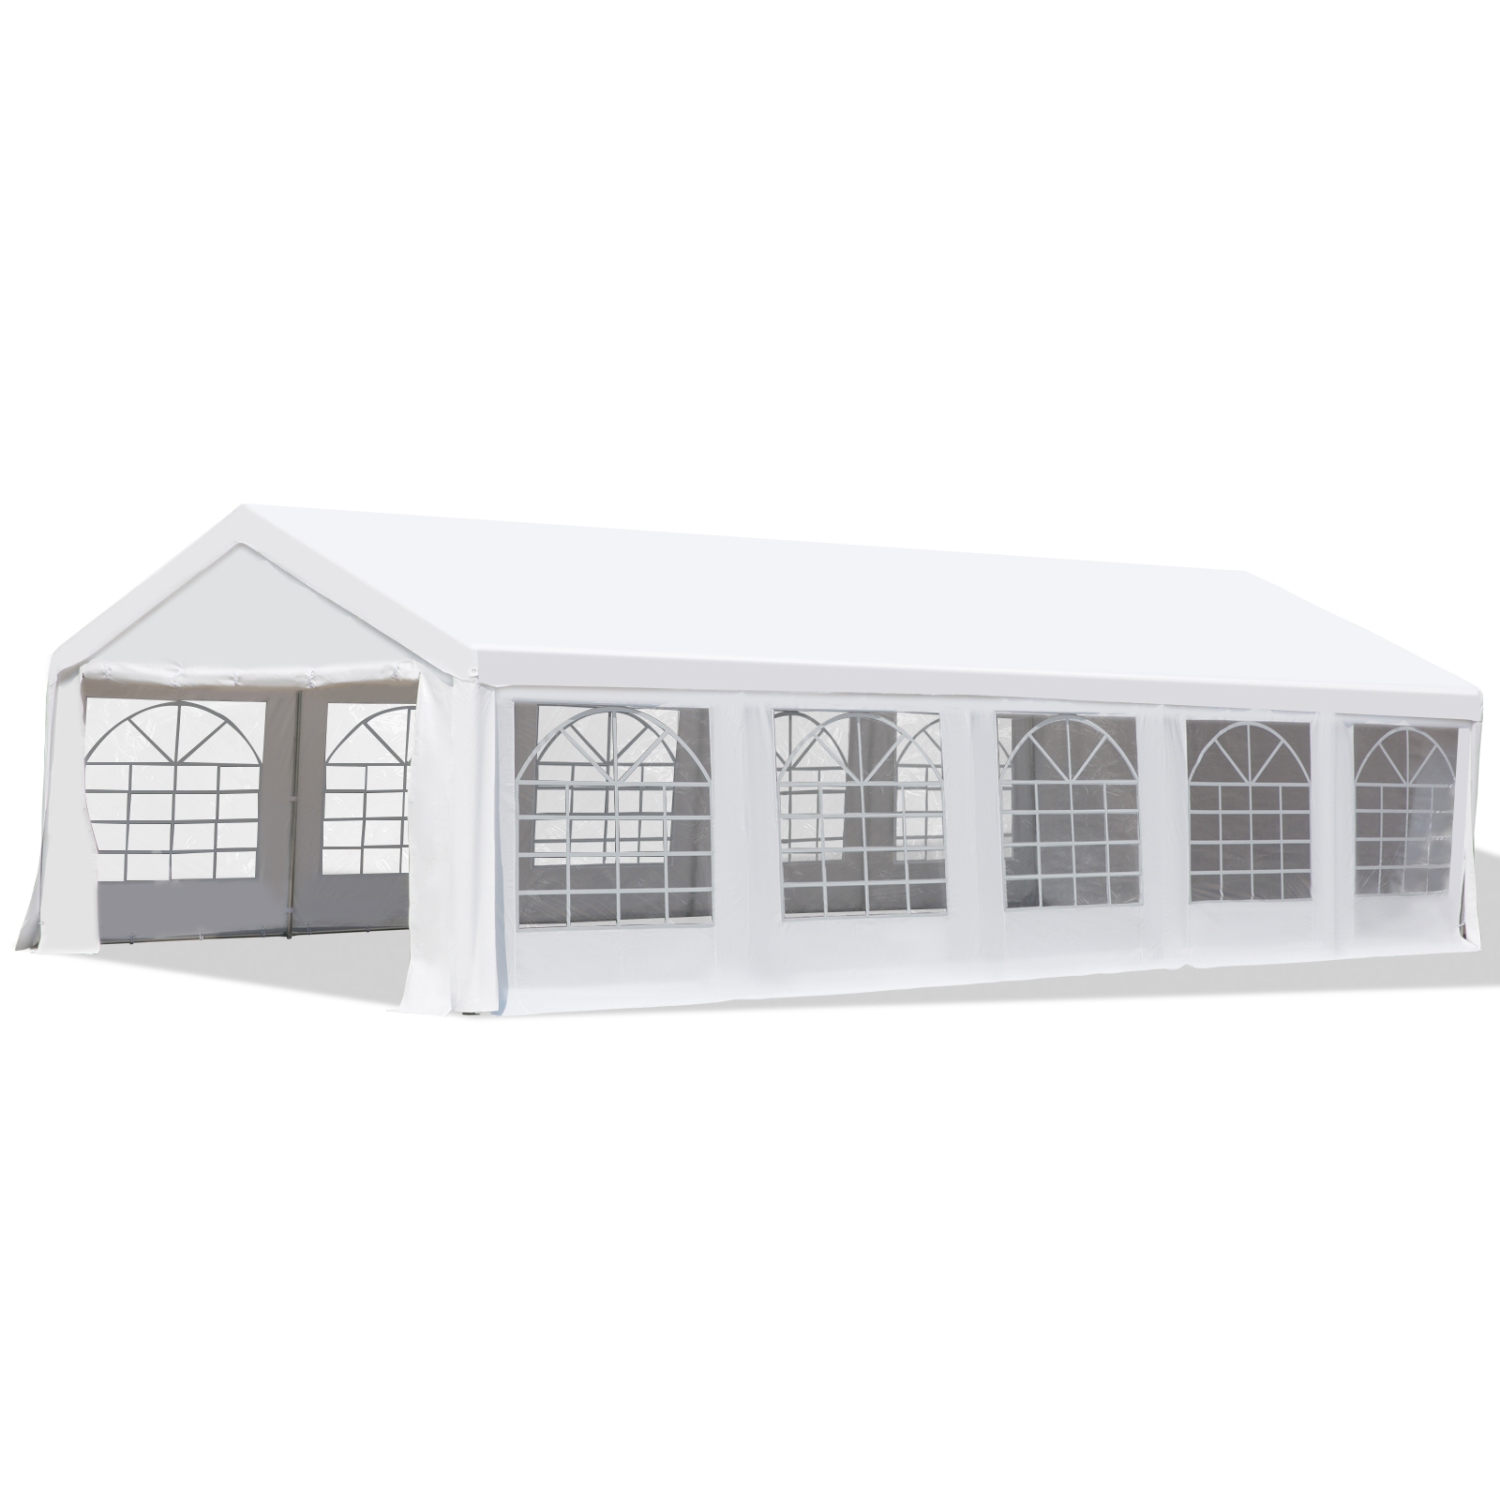 Outsunny 16'x32' Large Party Tent & Carport with Removable Sidewalls and Windows, Portable Garage Canopy Tent, Sun Shade Shelter, for Parties, Wedding, Outdoor Events, White